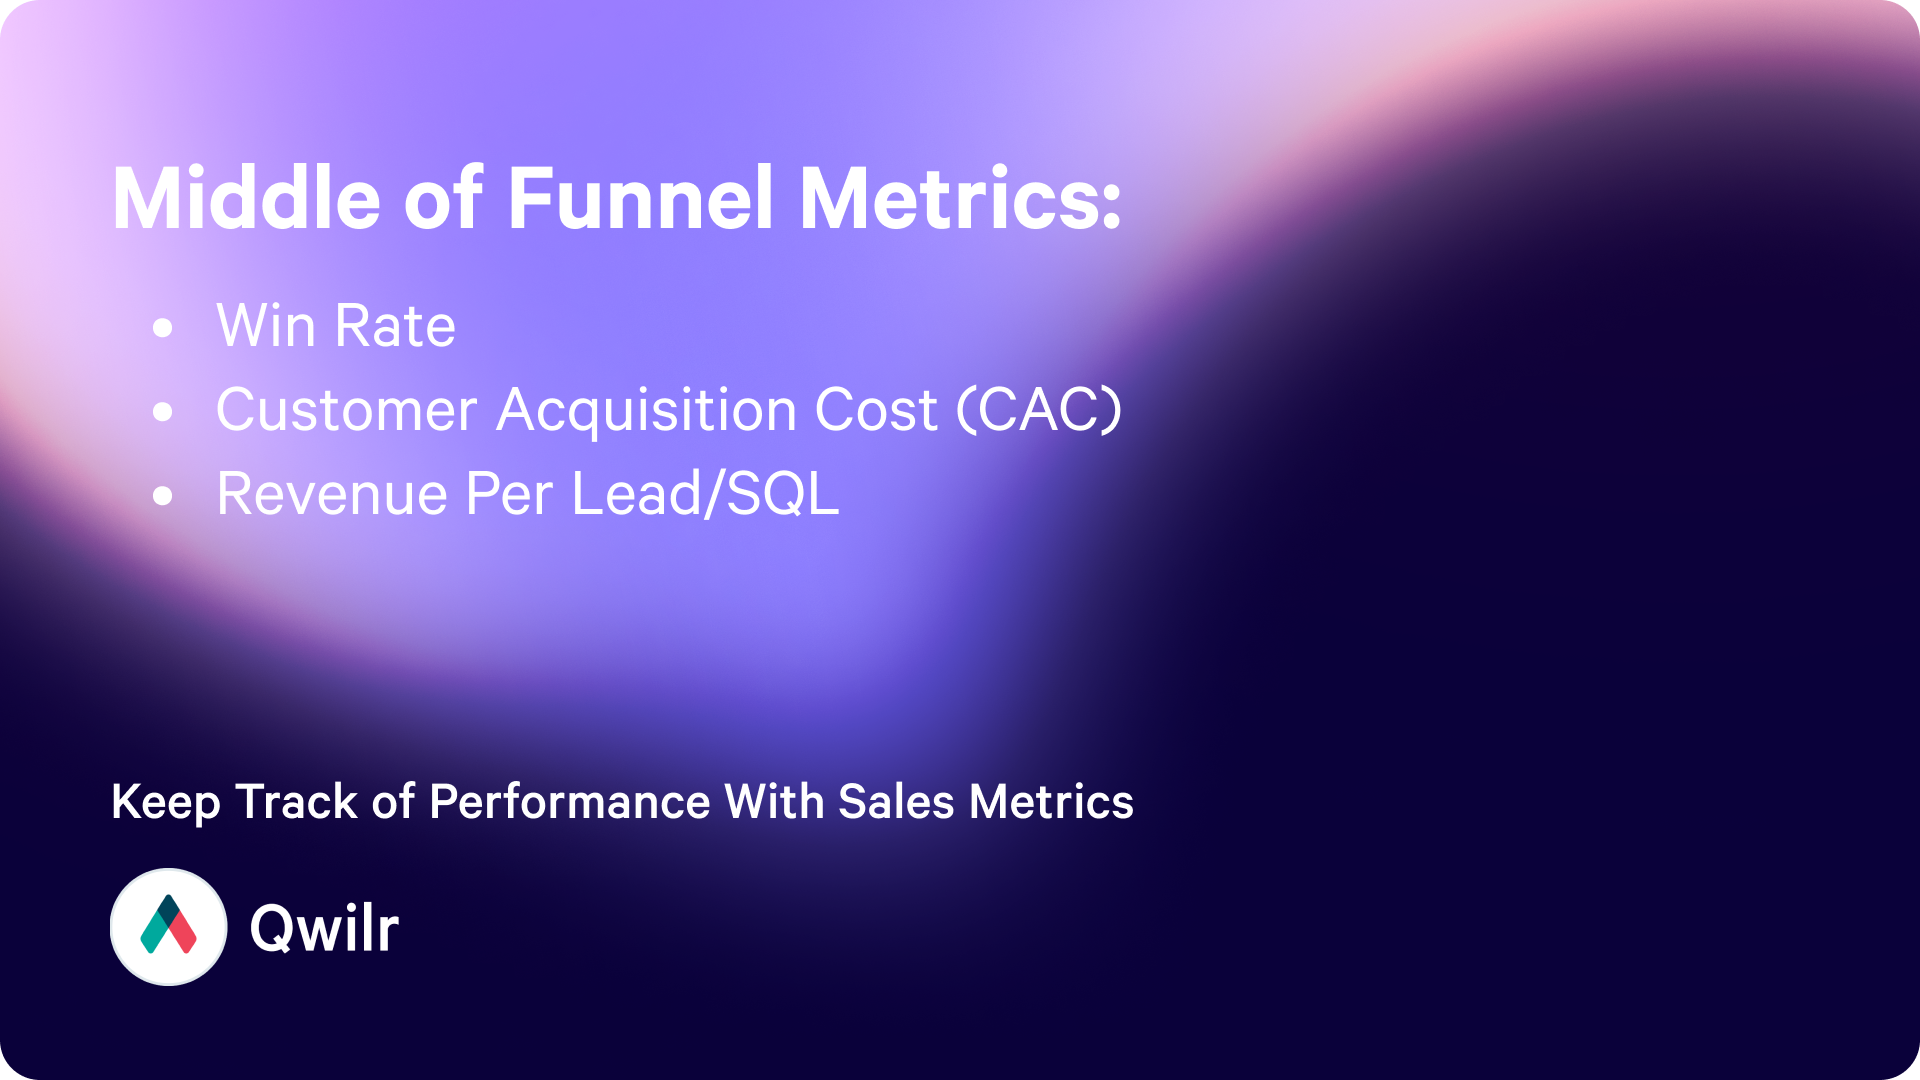 Key middle of funnel metrics are Win rates, CAC, and Revenue per lead/SQL 